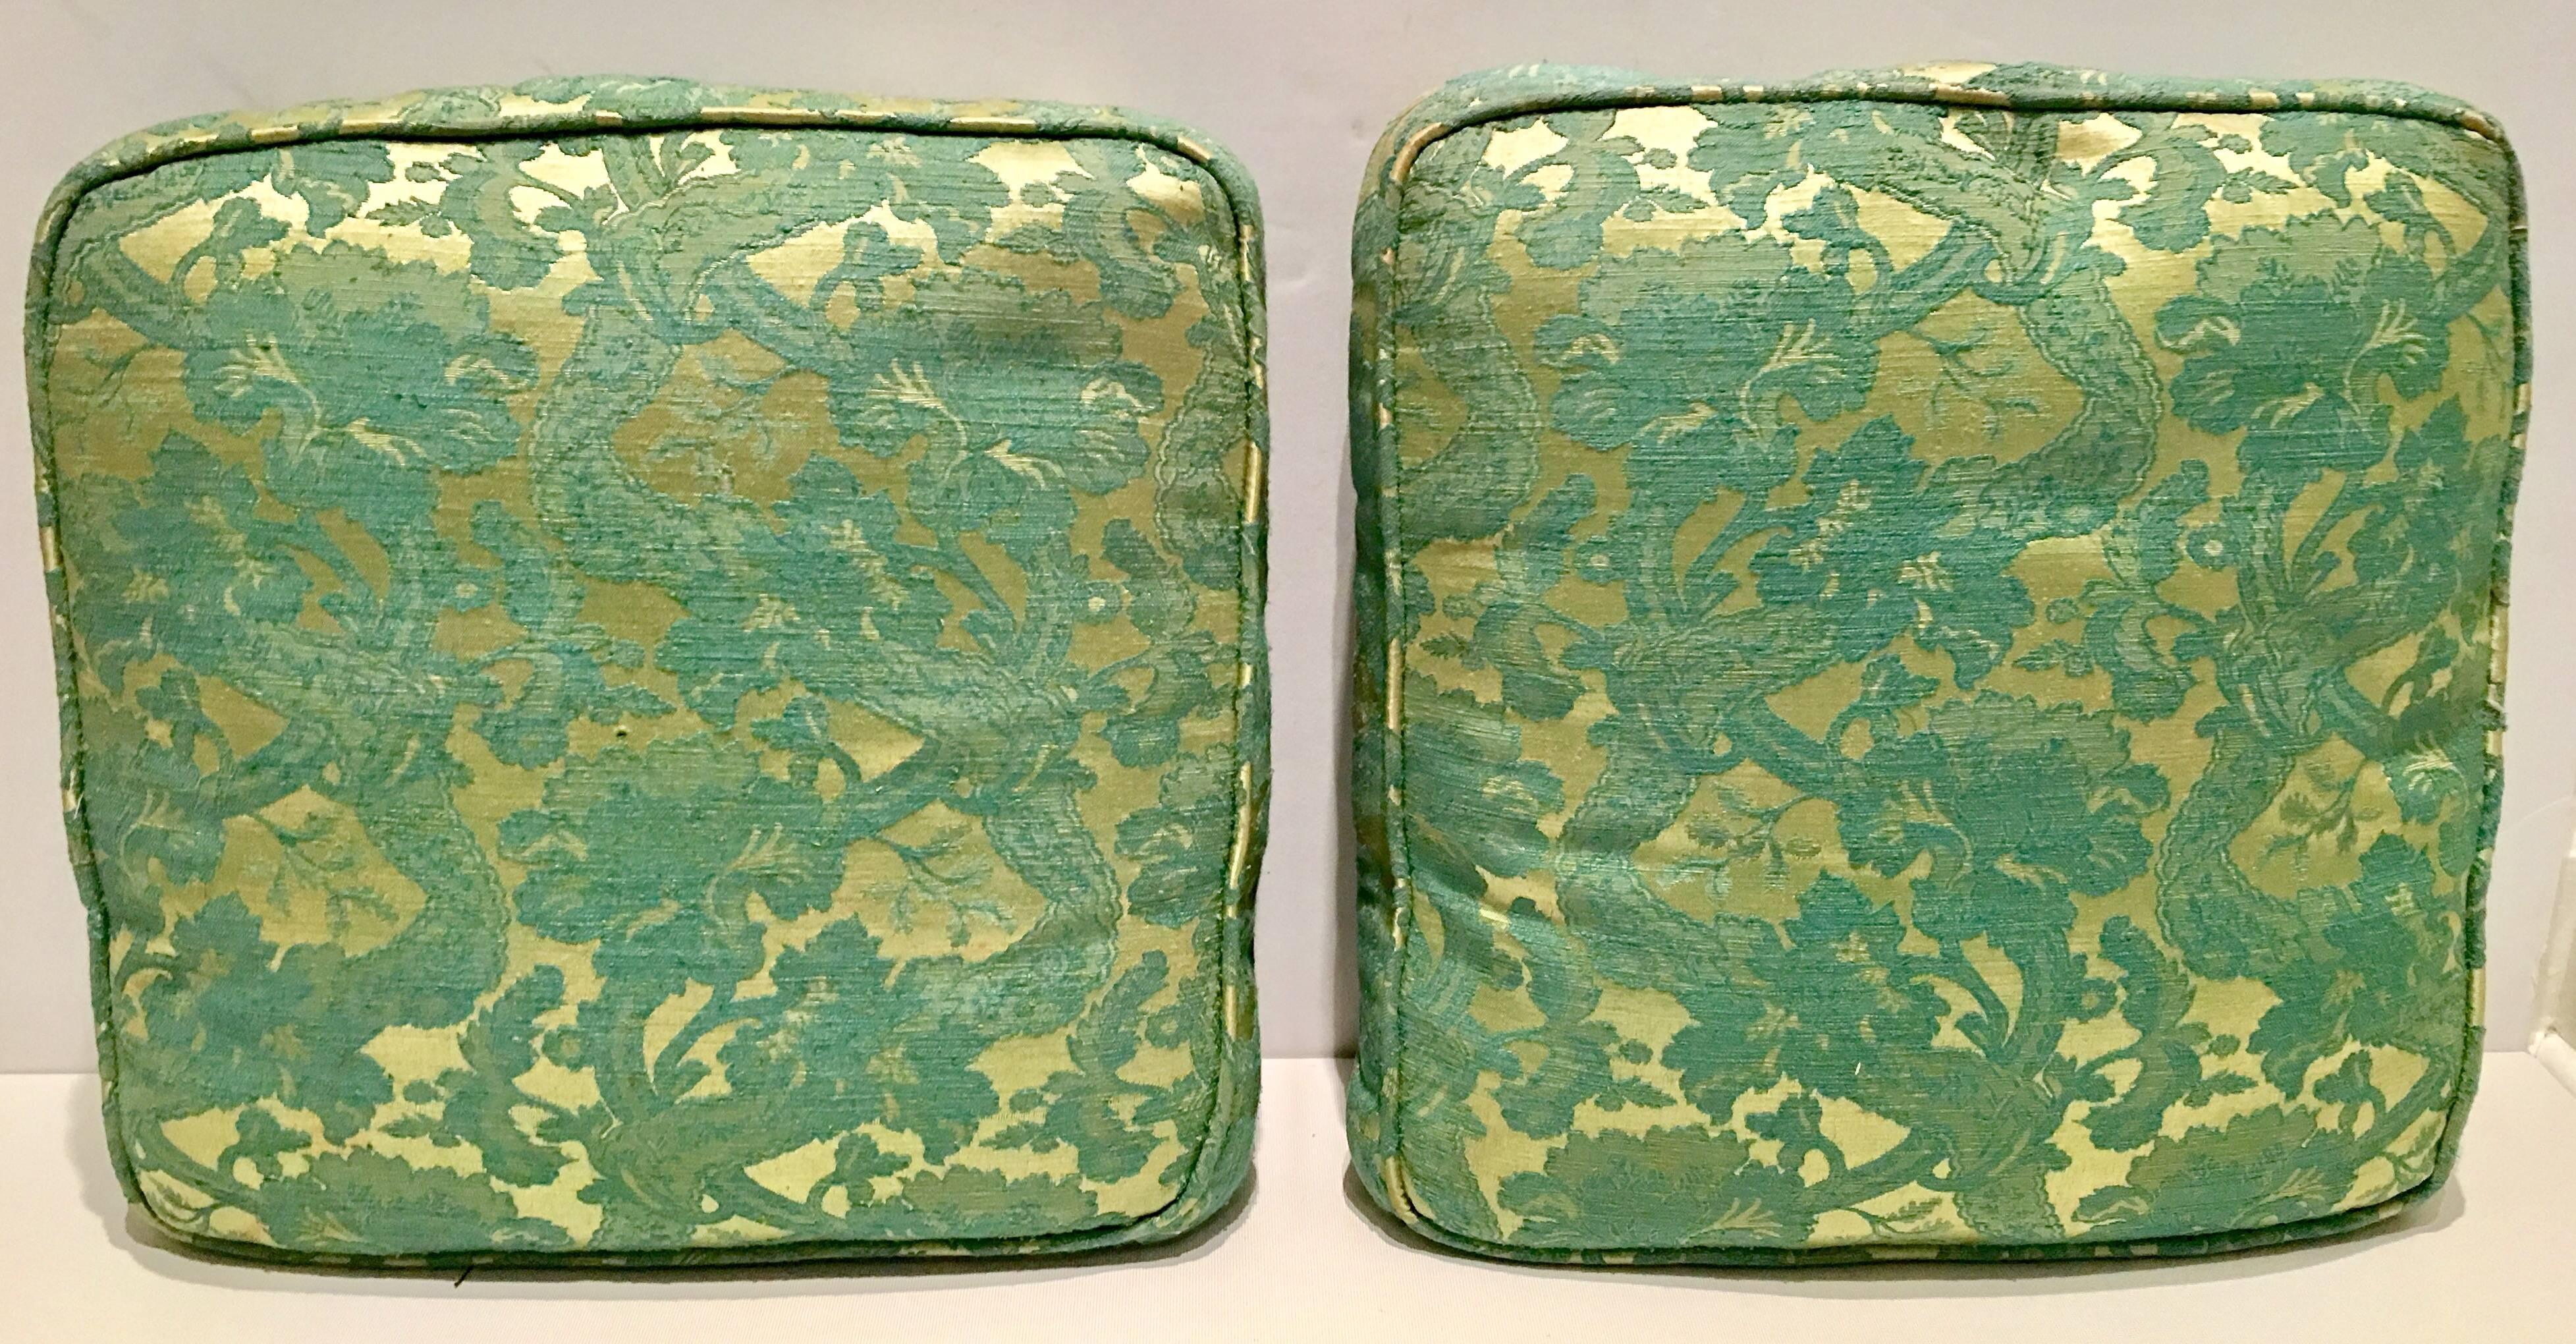 From a French Estate, A Pair of 19th Century chartreuse and turquoise damask lace over metallic silk square pillows or seat cushions with a self welt. The original linen covered part down inserts are present and in amazing pristine condition. Zipper